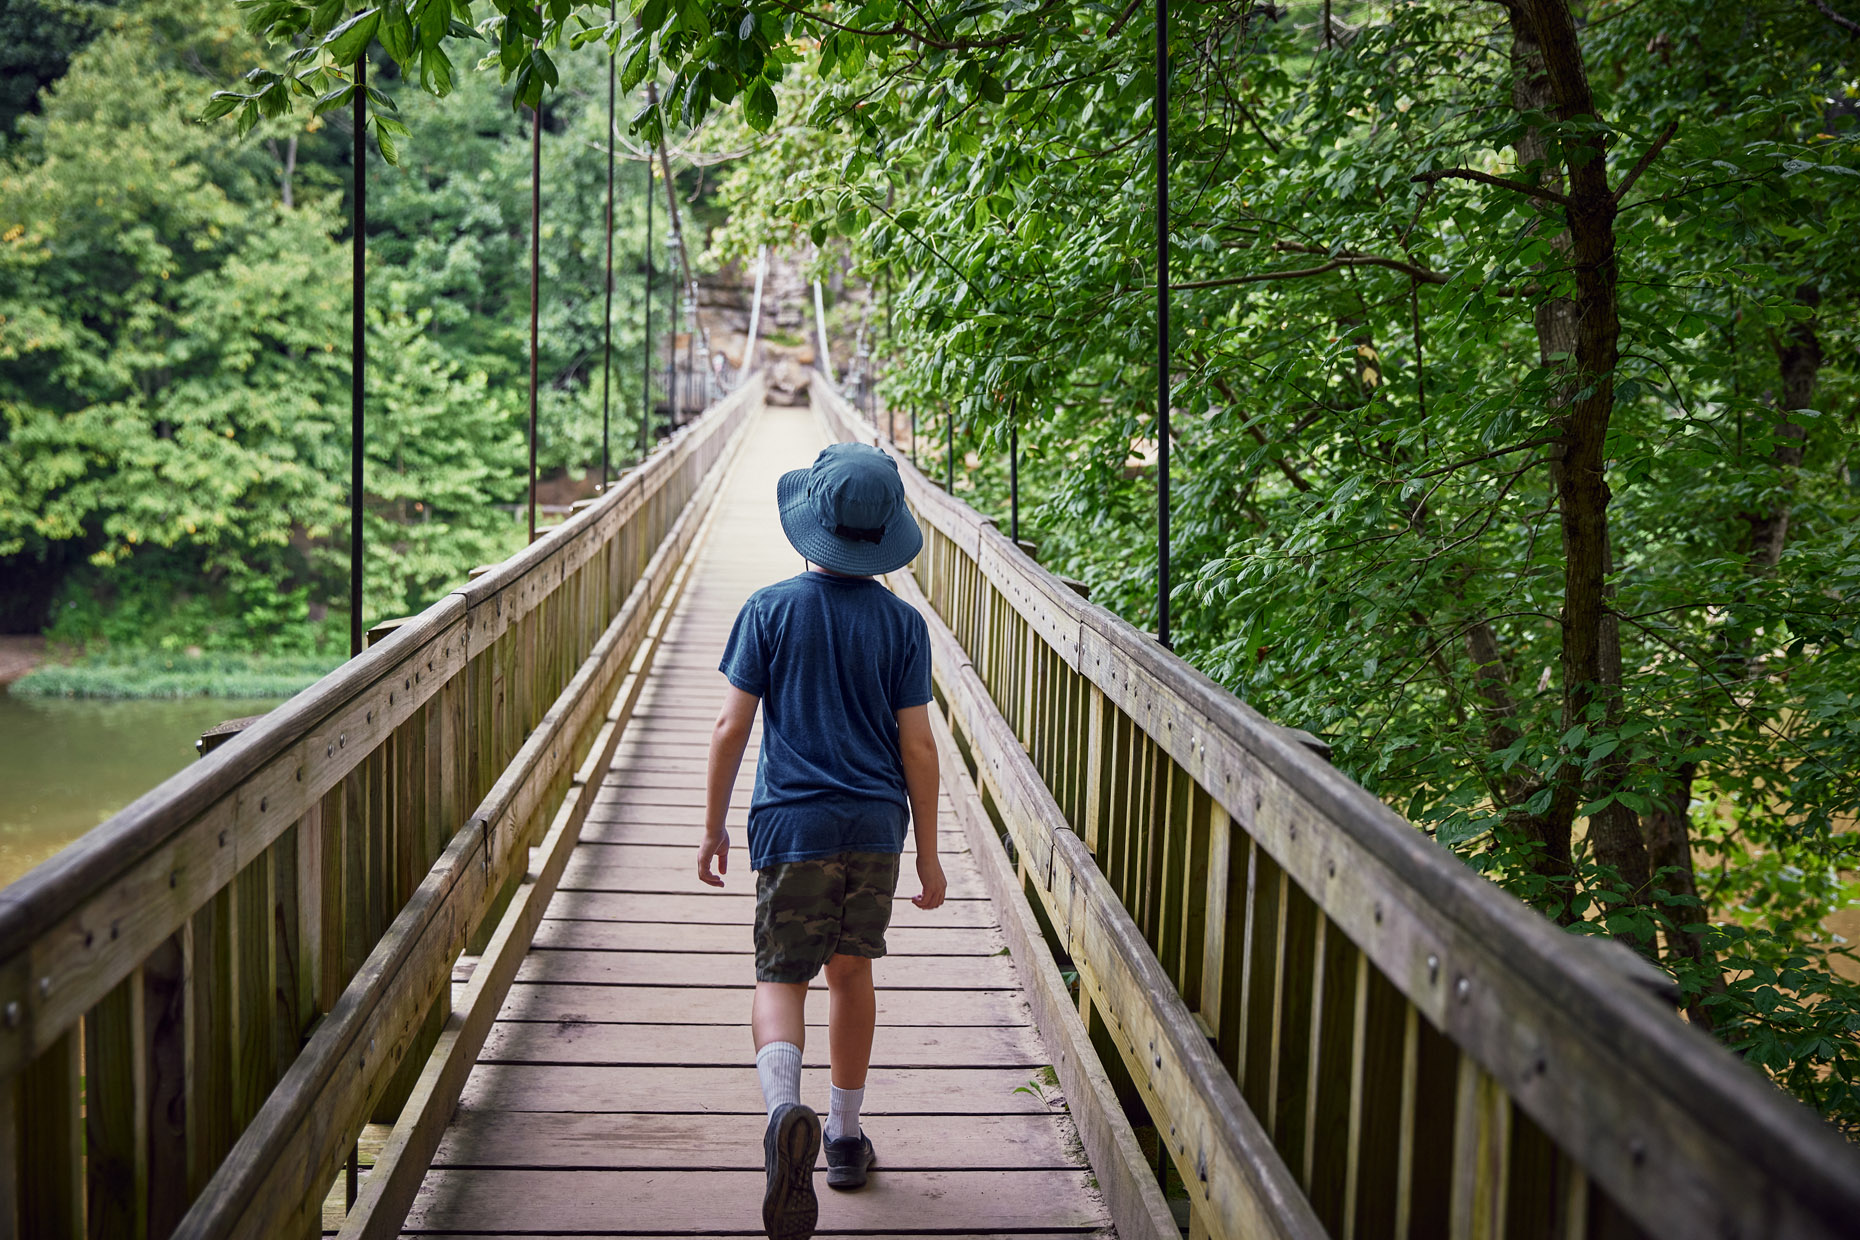 Boy walking across suspension bridge in the forest | Childrens photography by Saverio Truglia